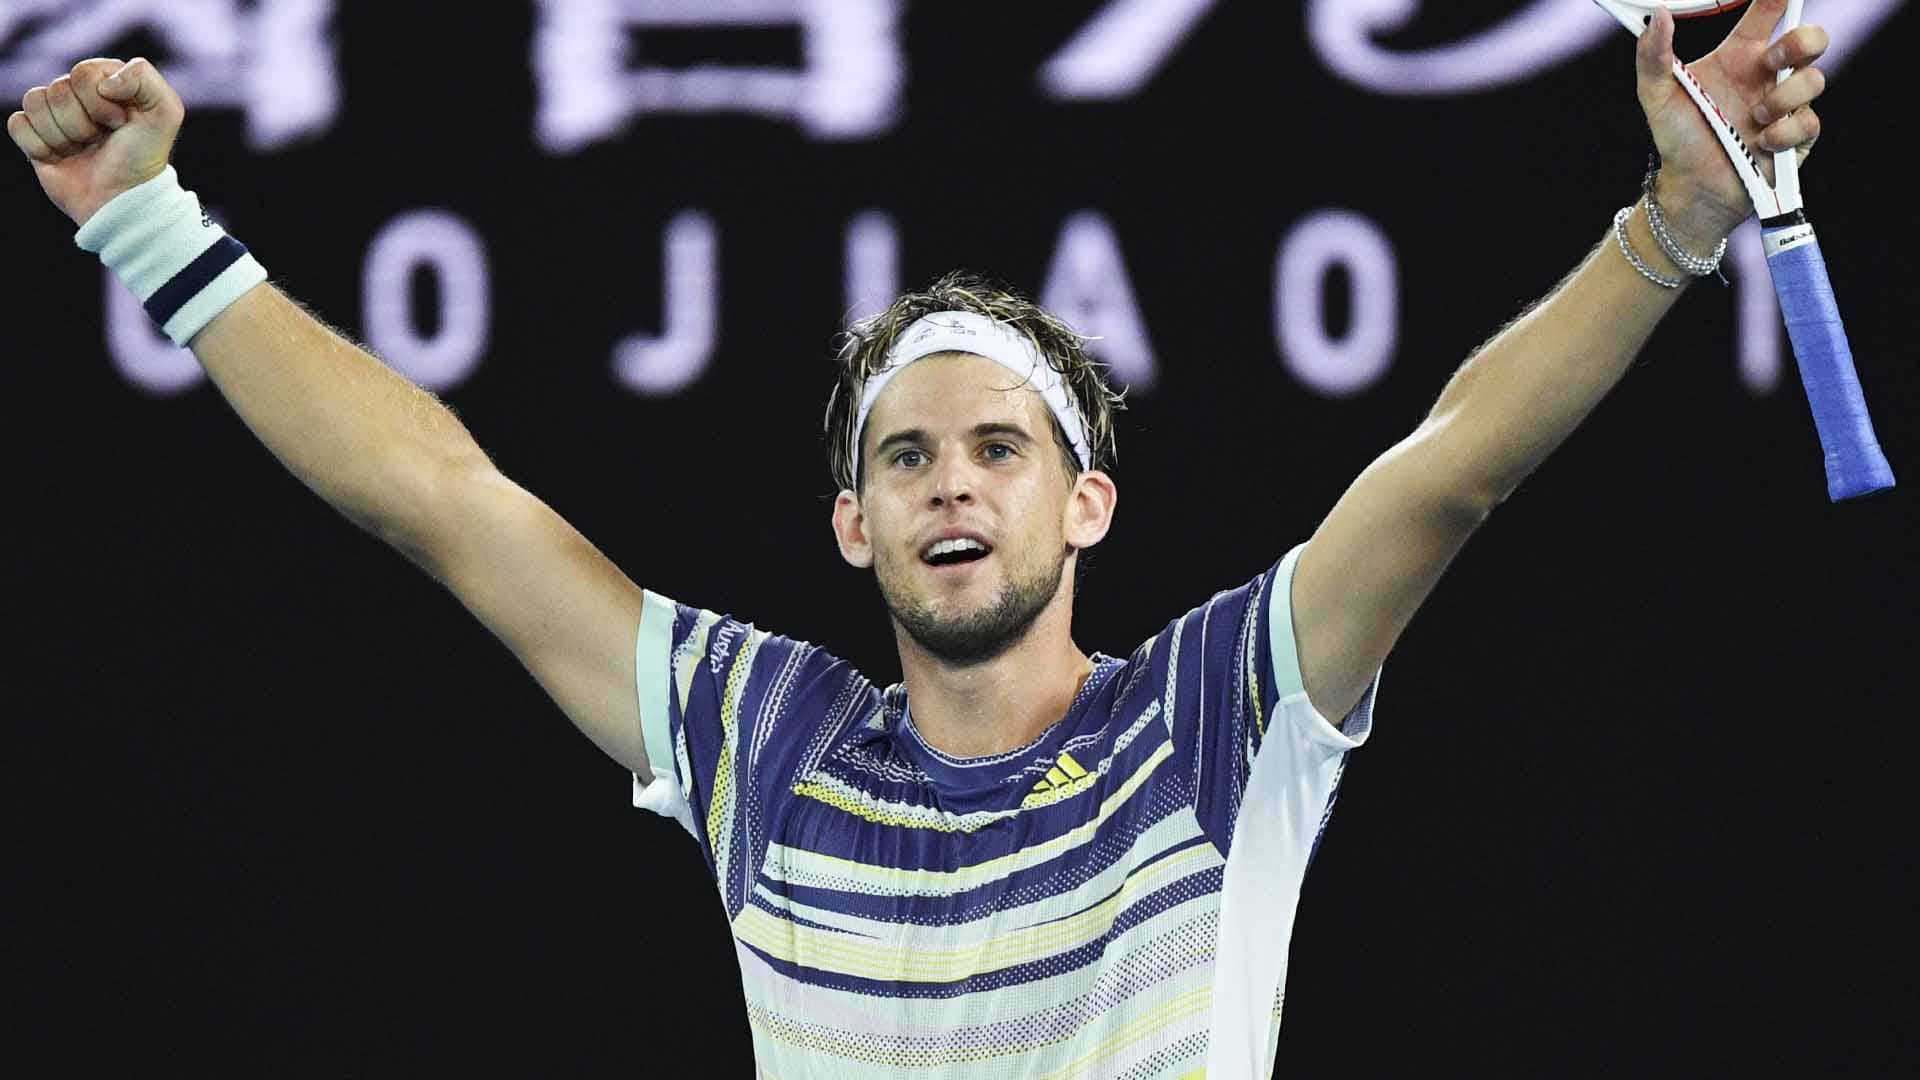 Dominic Thiem beats Rafael Nadal for the first time at a Grand Slam to reach his maiden Australian Open semi-final.